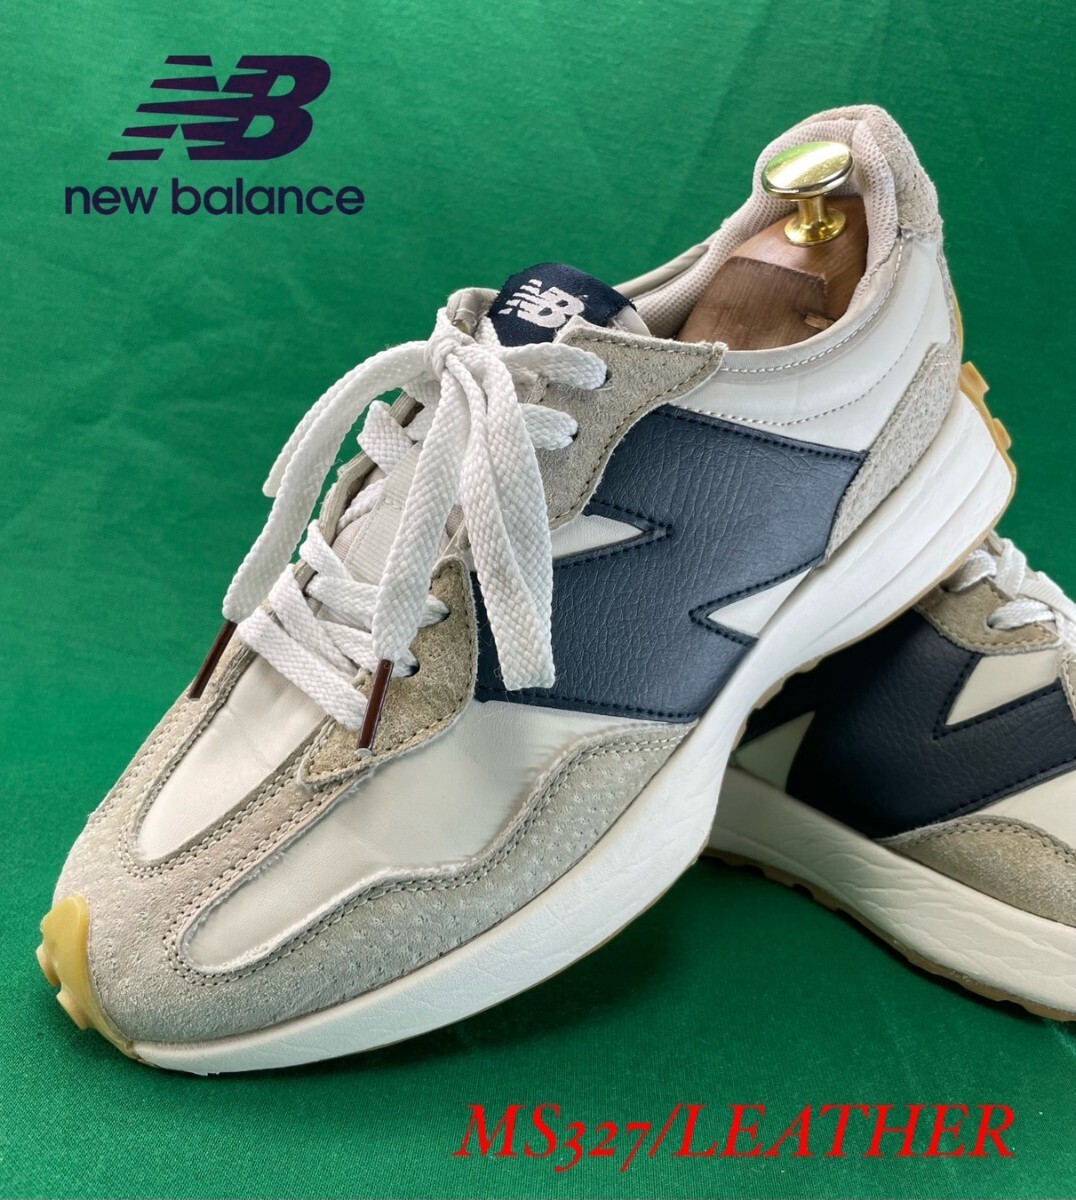  name machine ..! masterpiece college color! all leather model! New balance [WS327] high class leather sneakers! thickness bottom! white × navy blue × ash 25.5cm/US8.5/B